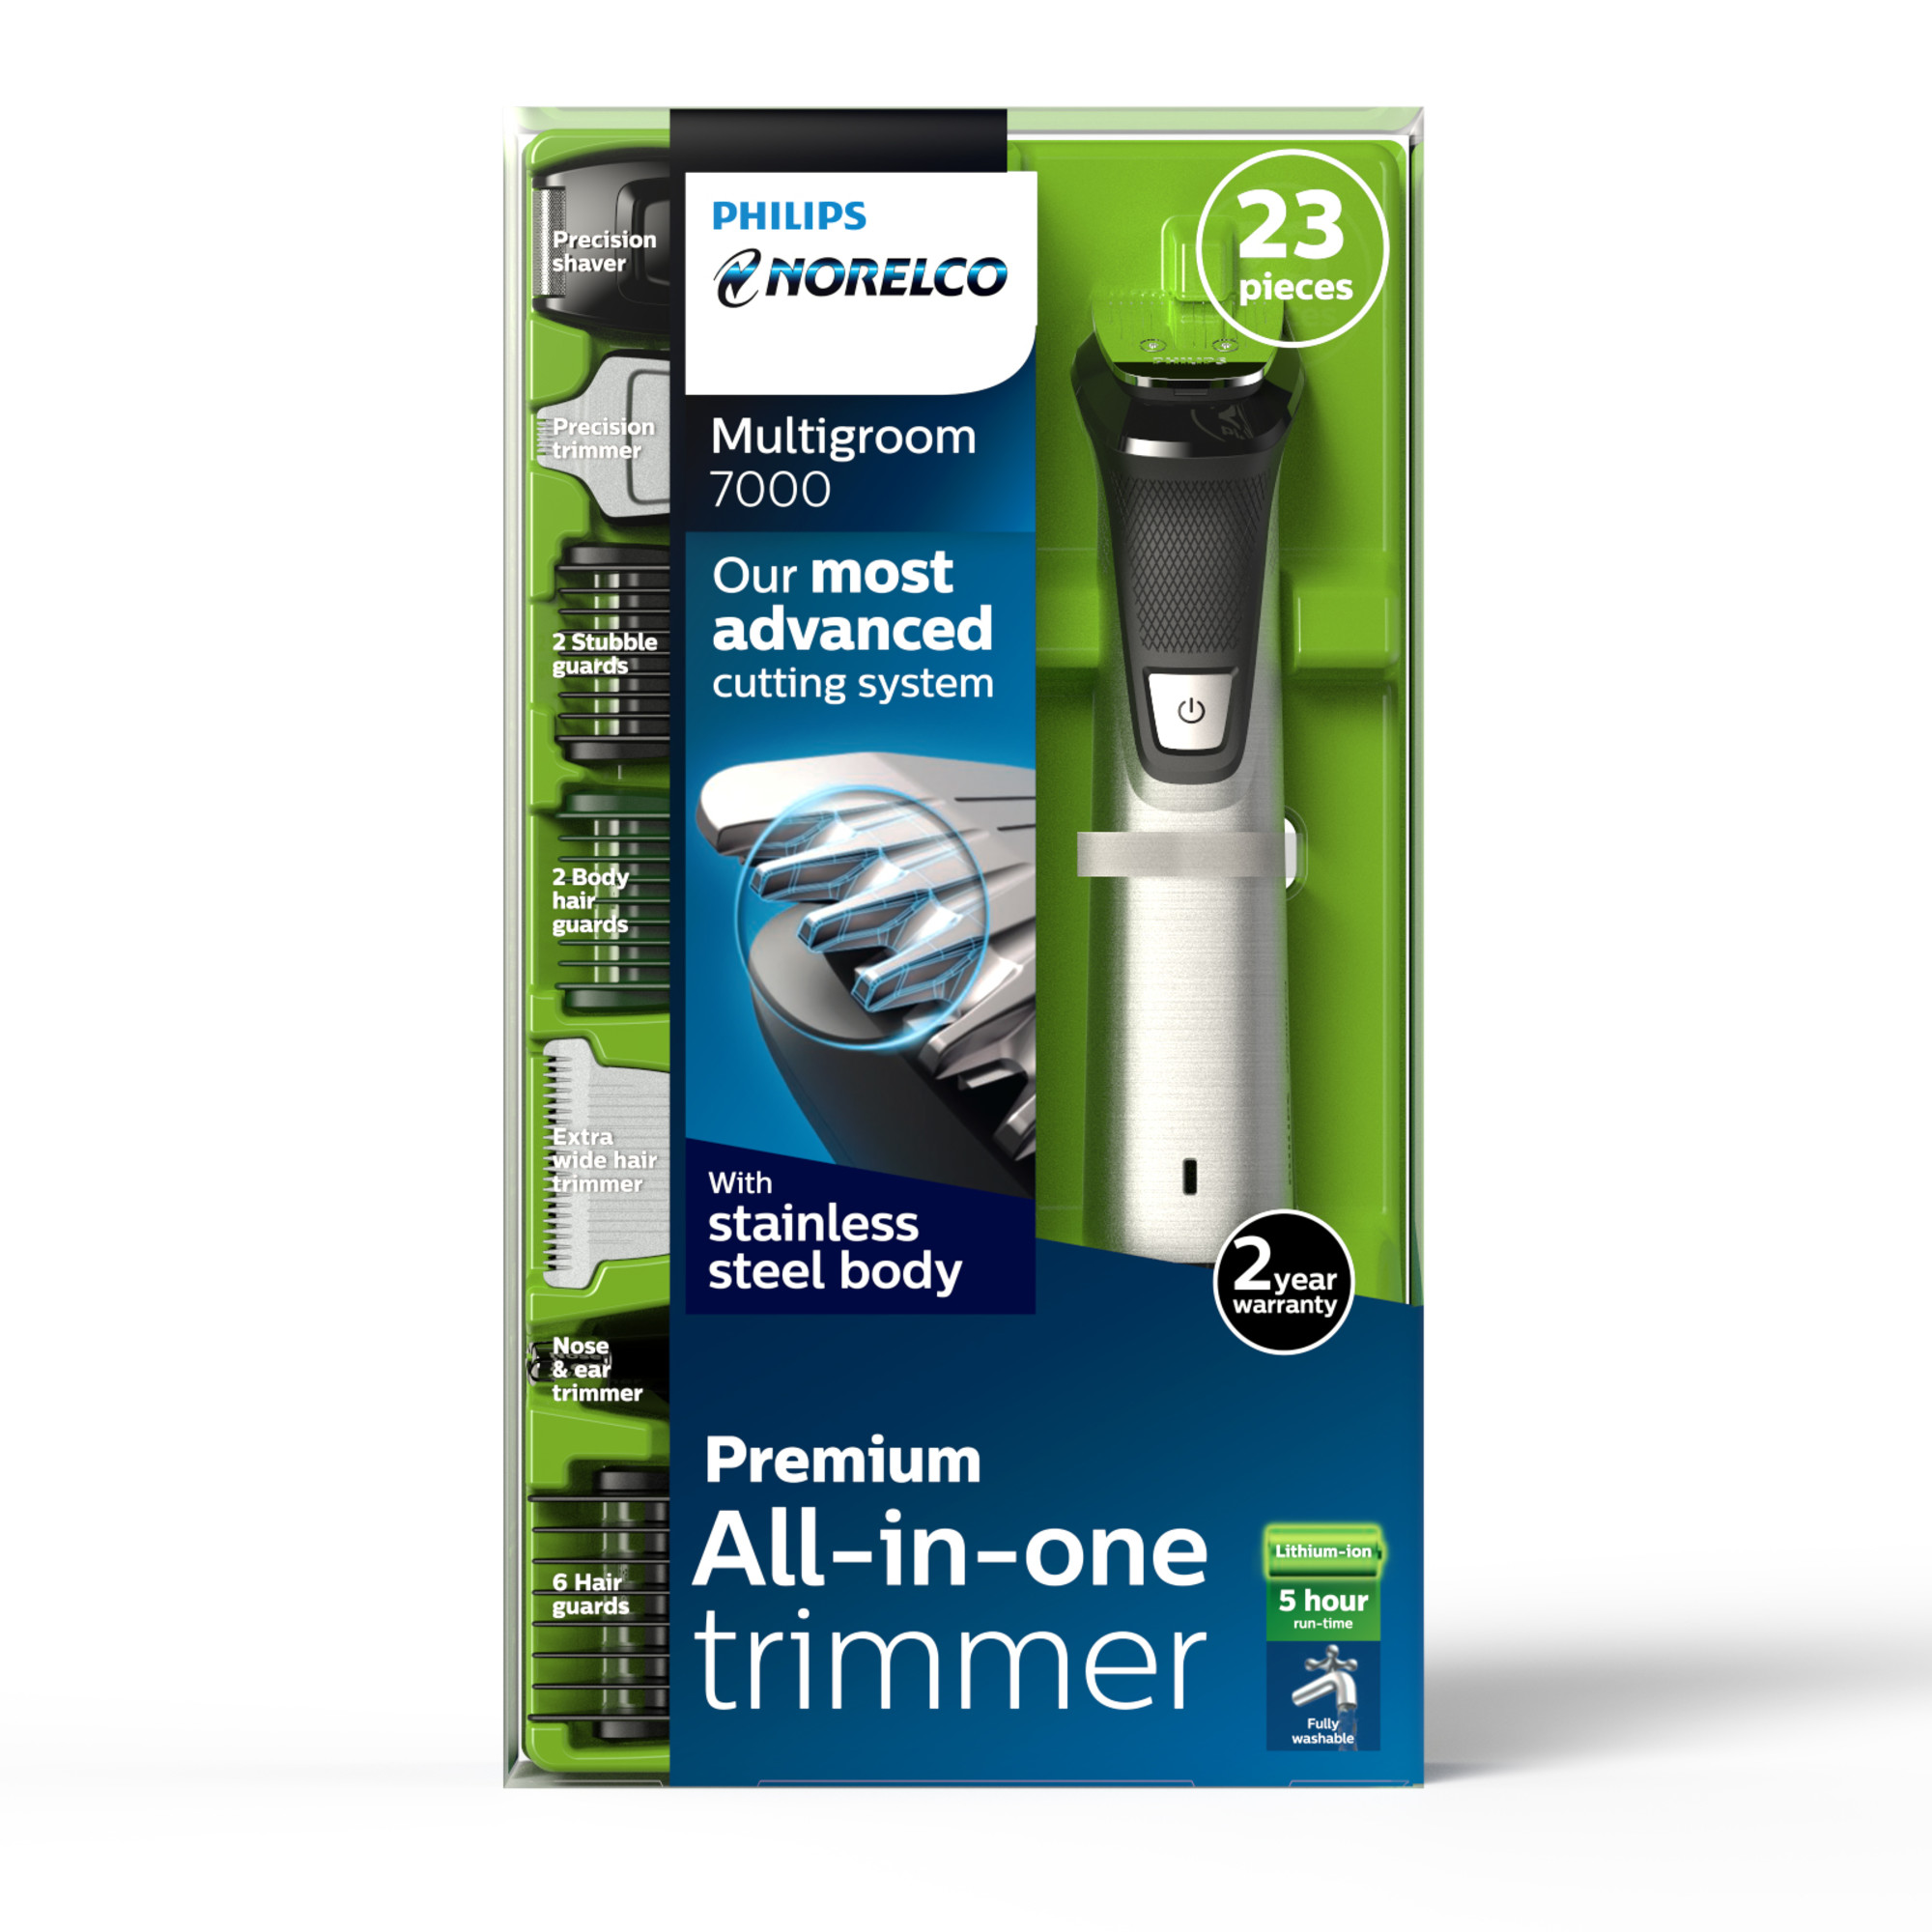 Philips Norelco Multigroom Series 7000 23 Piece Mens Grooming Kit, Trimmer For Beard, Head, Body, and Face - No Blade Oil Needed, MG7750/49 - image 20 of 21